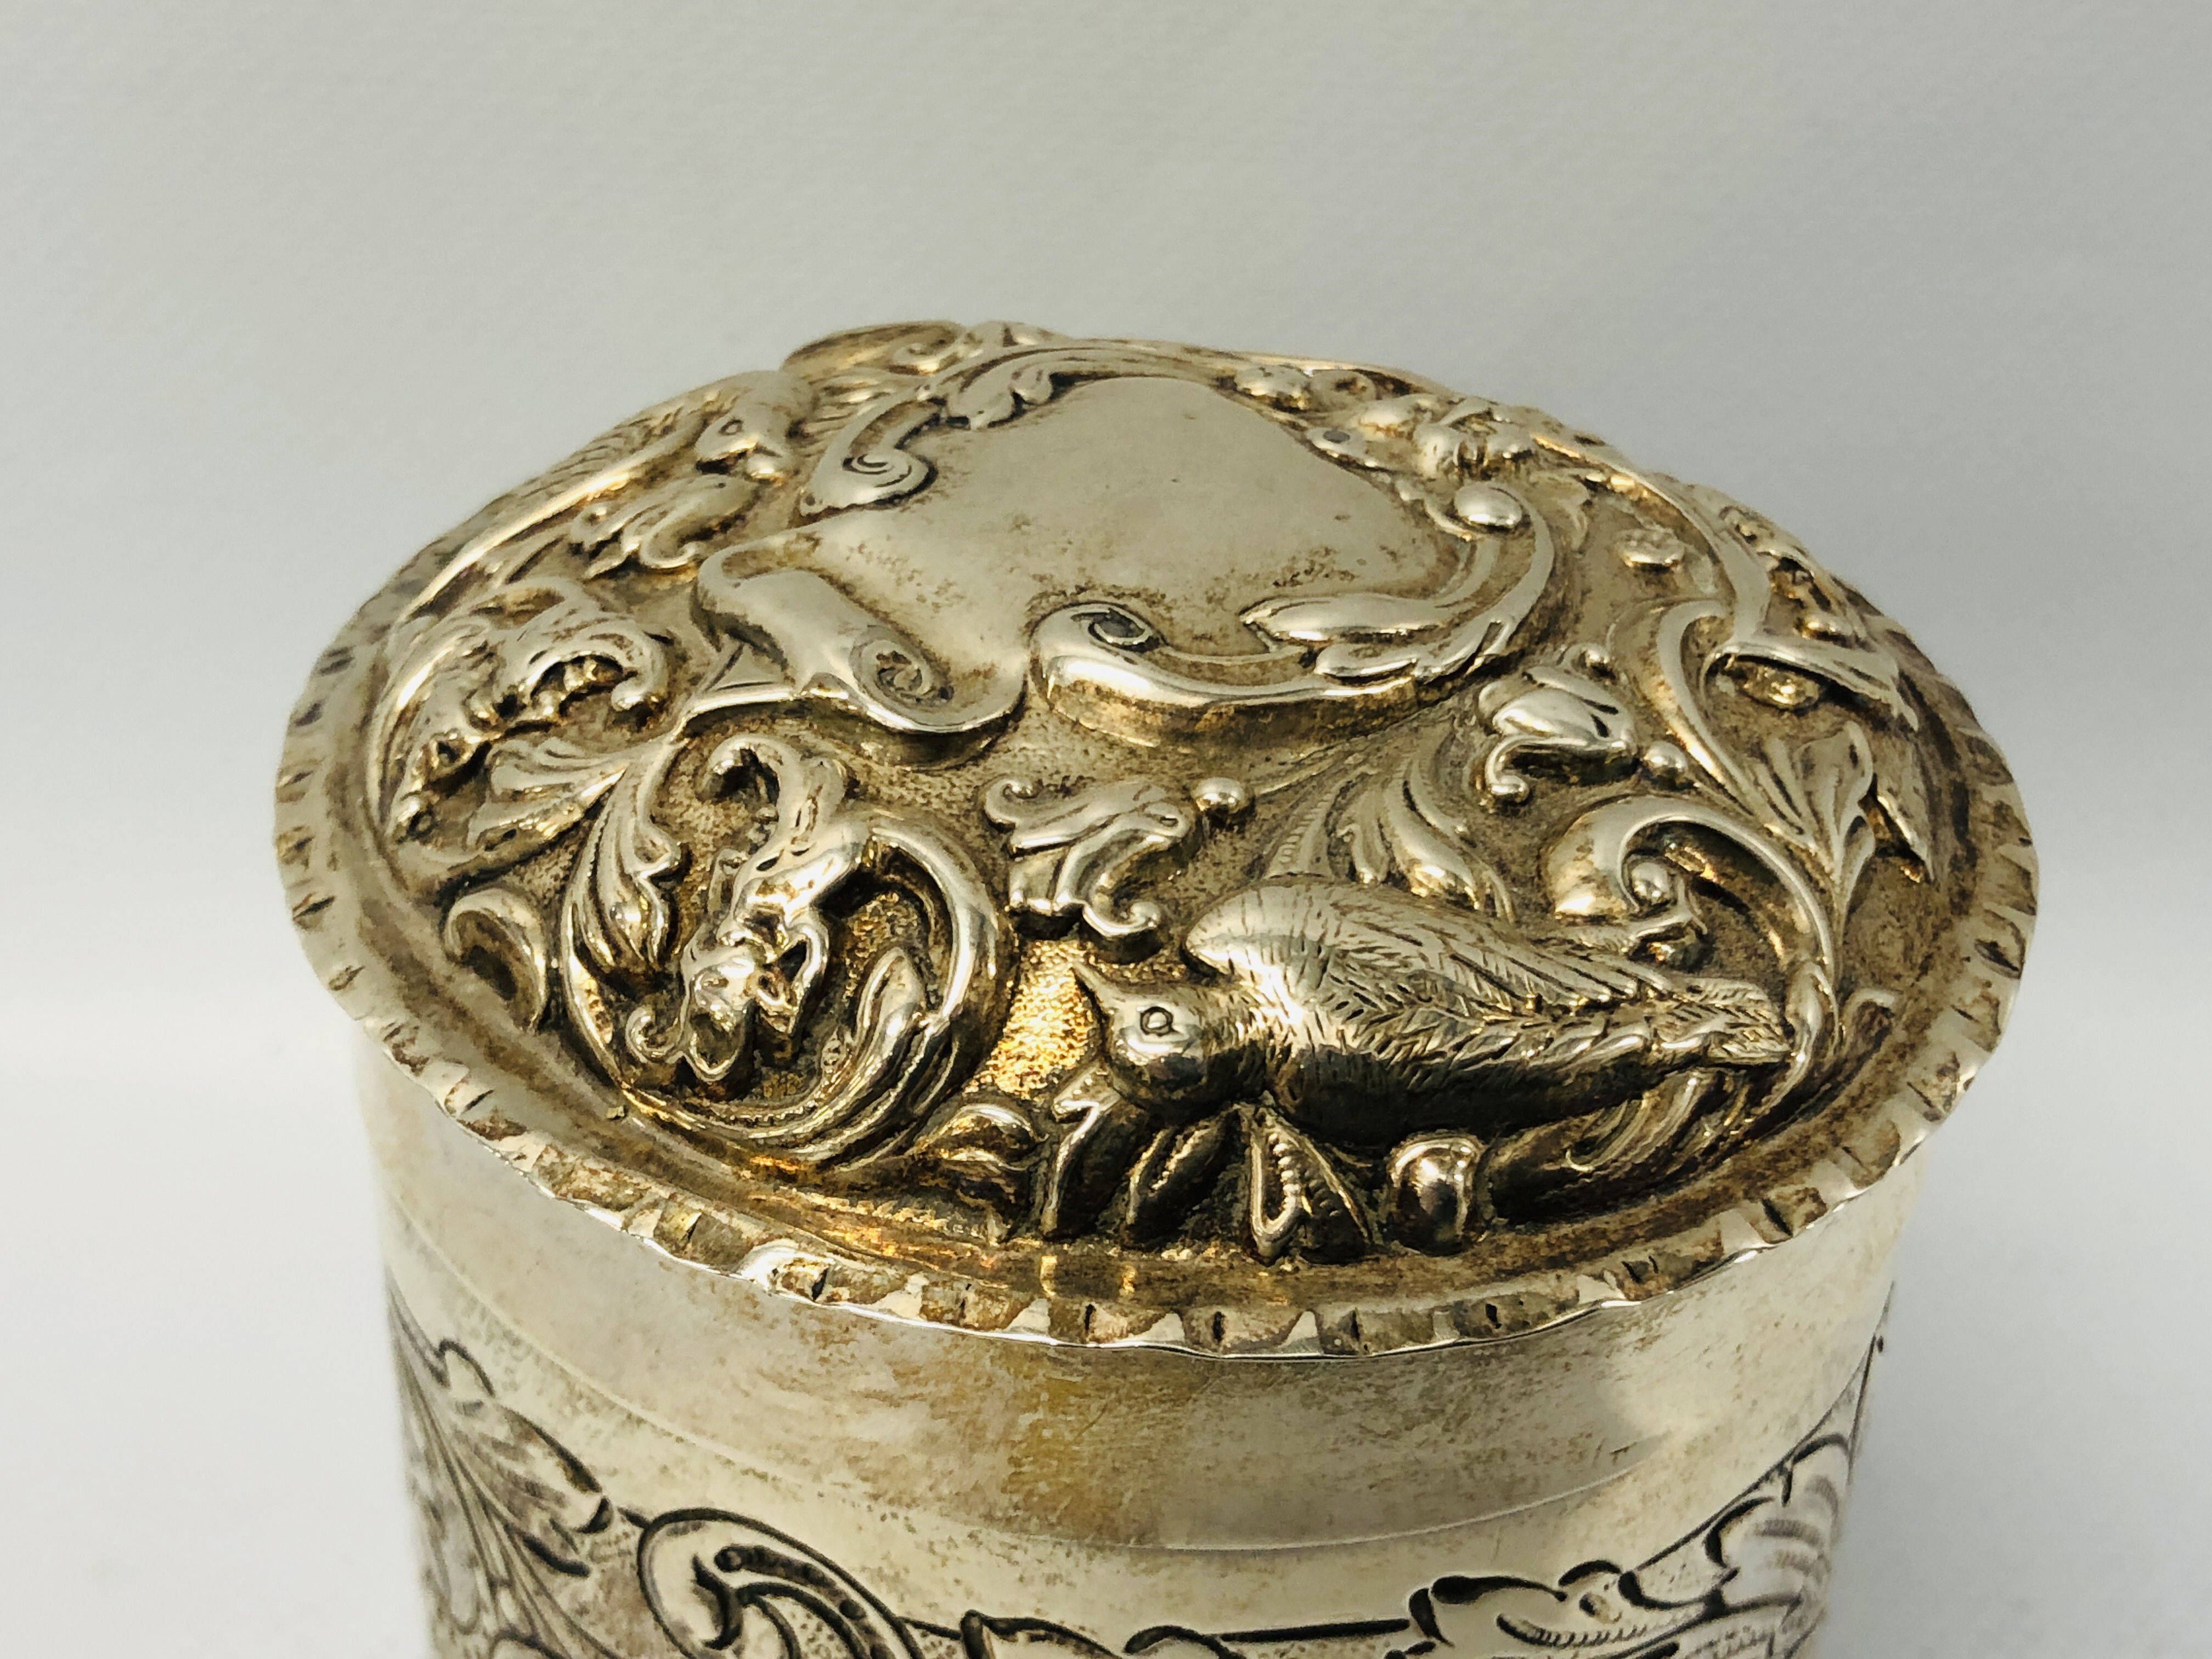 A VICTORIAN SILVER CYLINDRICAL BOX AND COVER DECORATED WITH BIRD LONDON 1888, WILLIAM COMINS - H 8. - Image 14 of 21